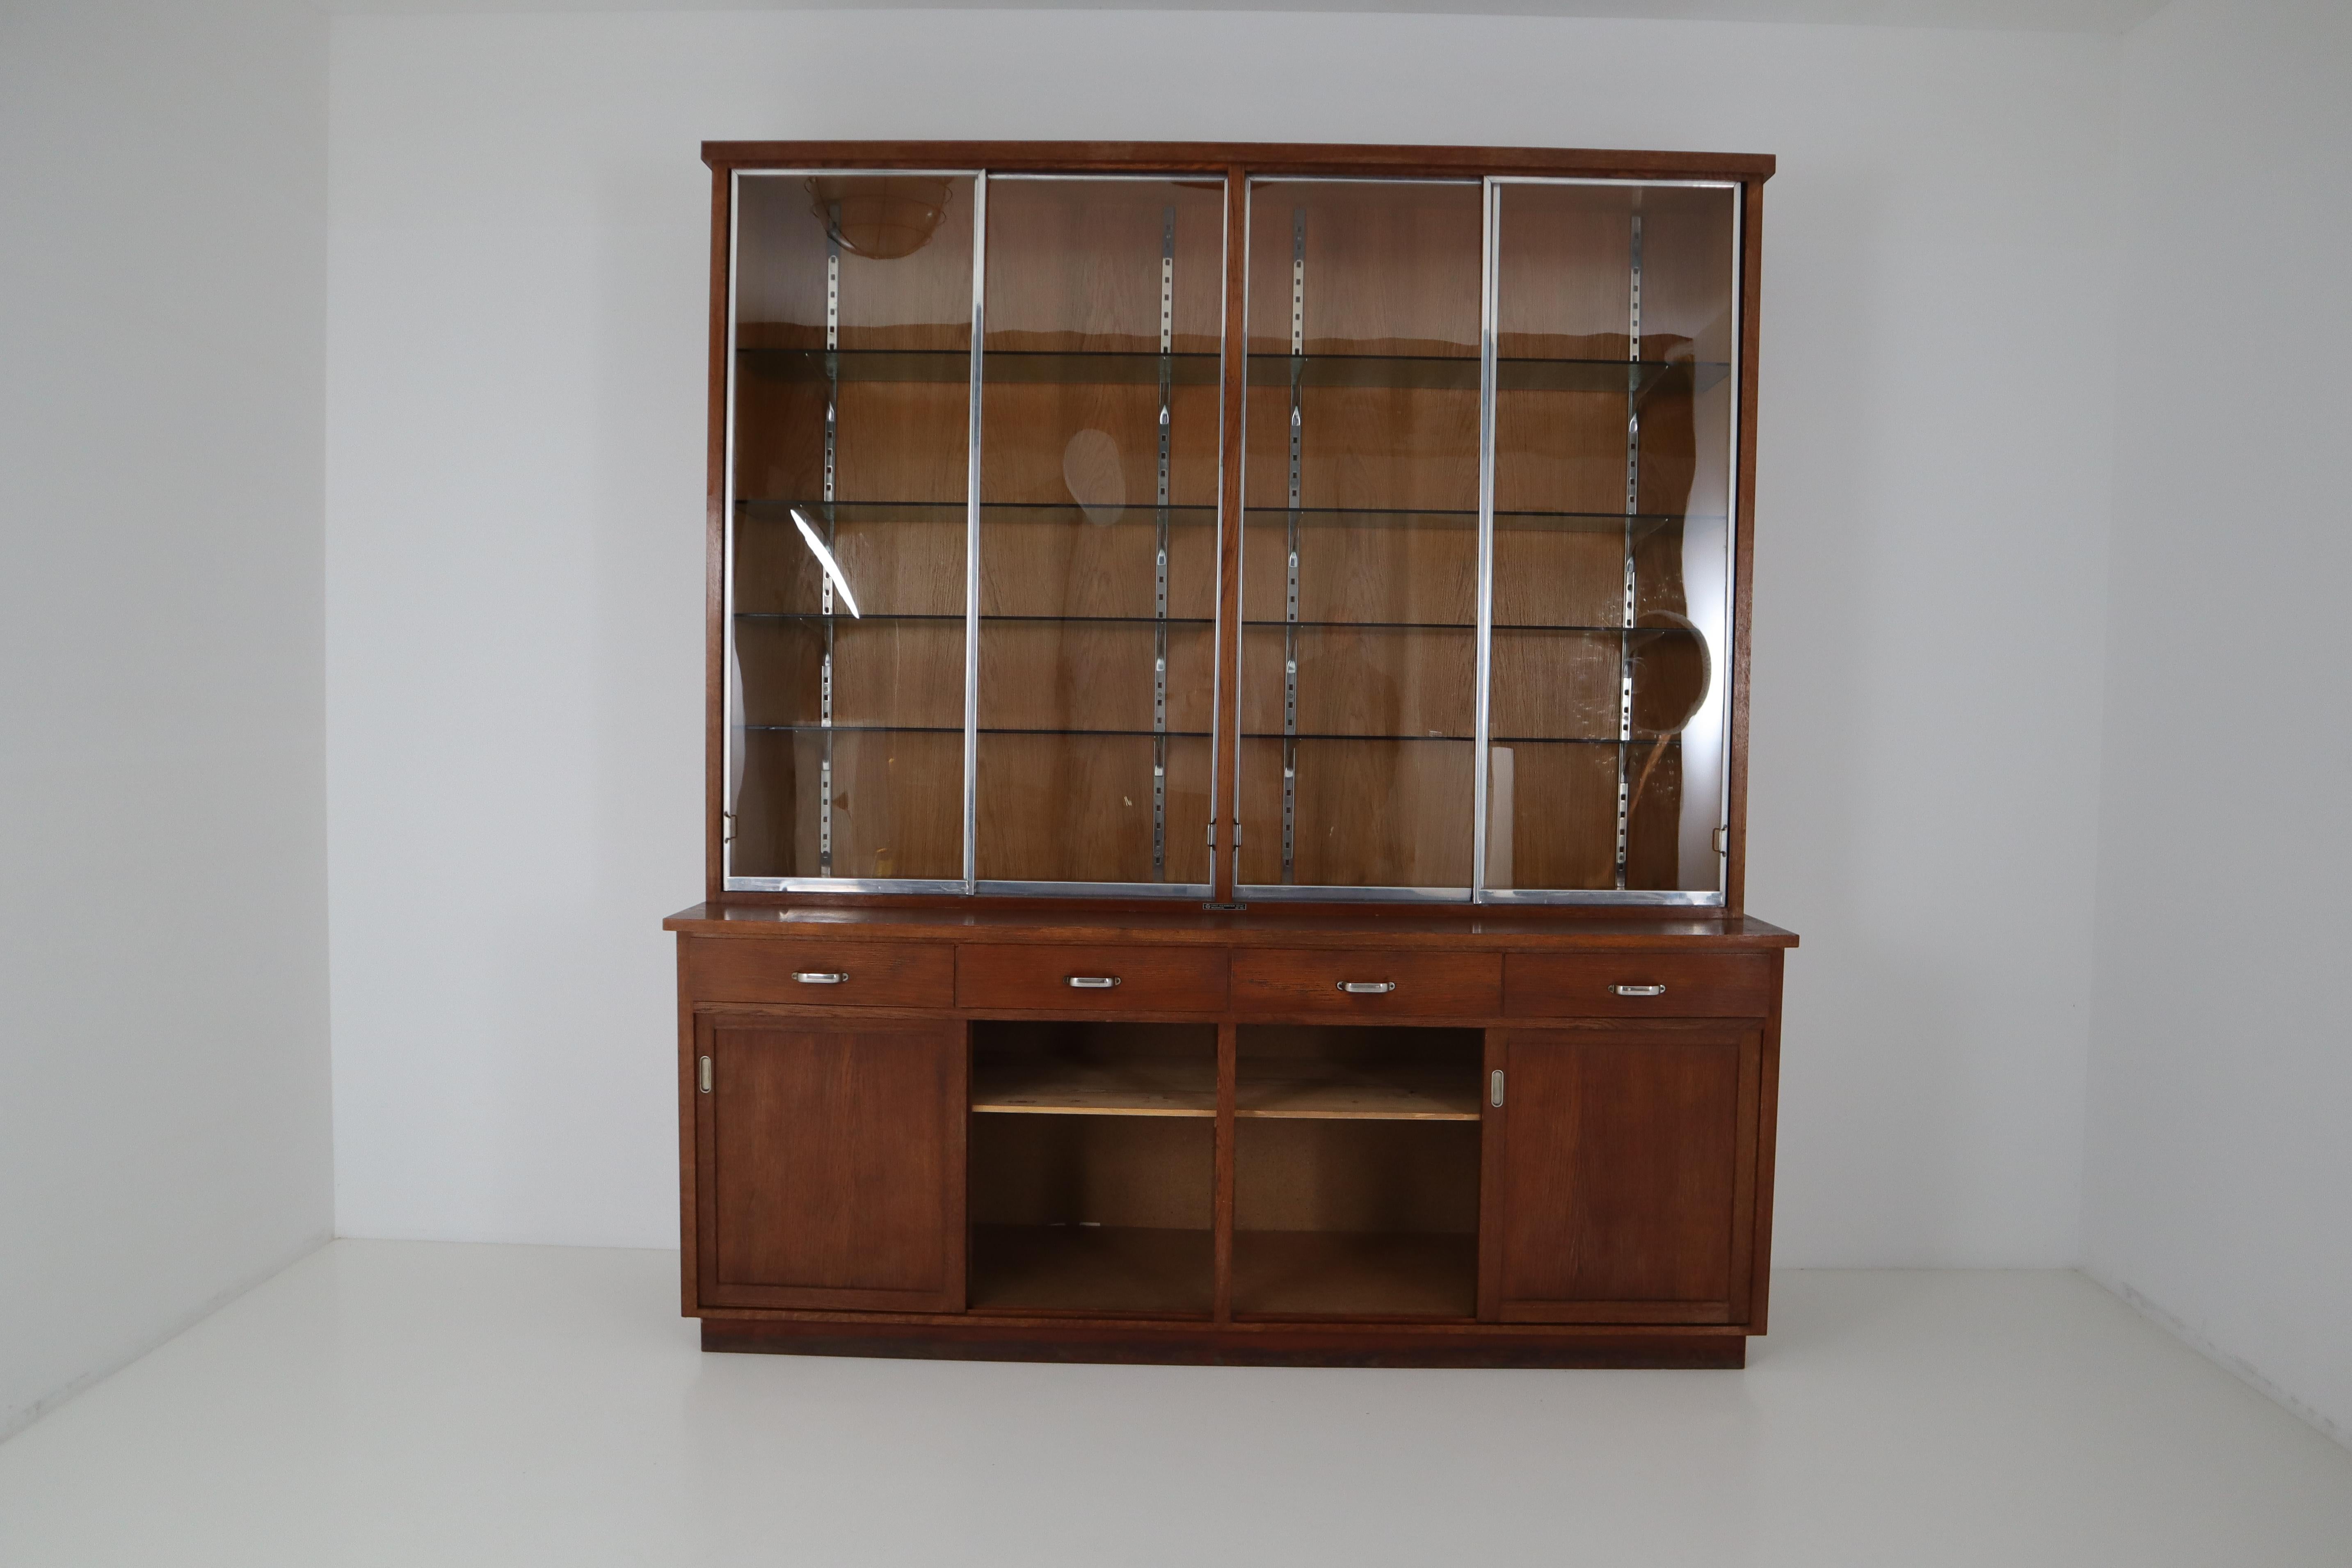 Ernst Rockhausen Bauhaus Style Plywood and Oak Display Cabinet, Germany, 1920s For Sale 1